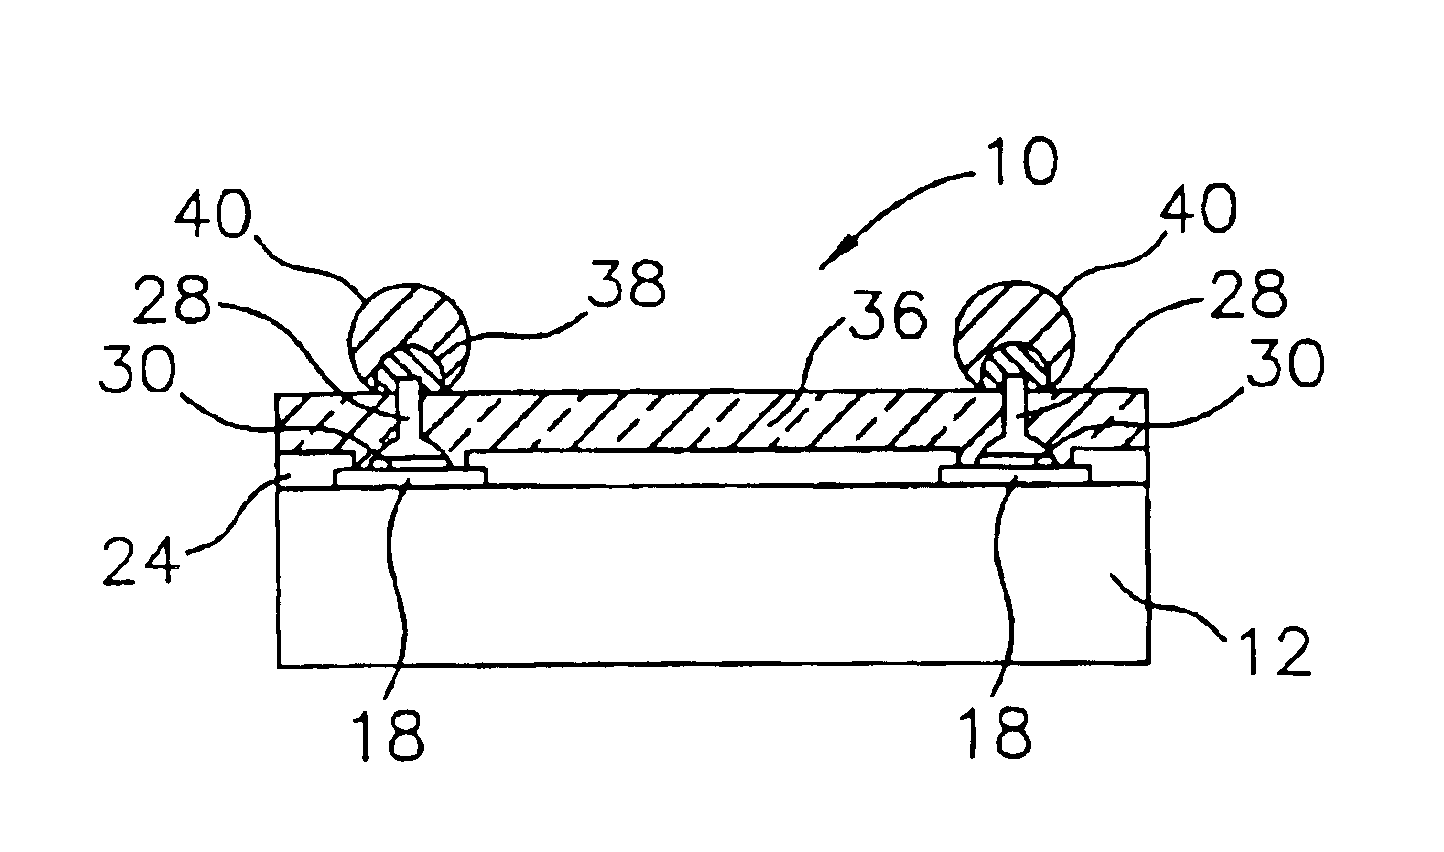 Semiconductor component having encapsulated, bonded, interconnect contacts